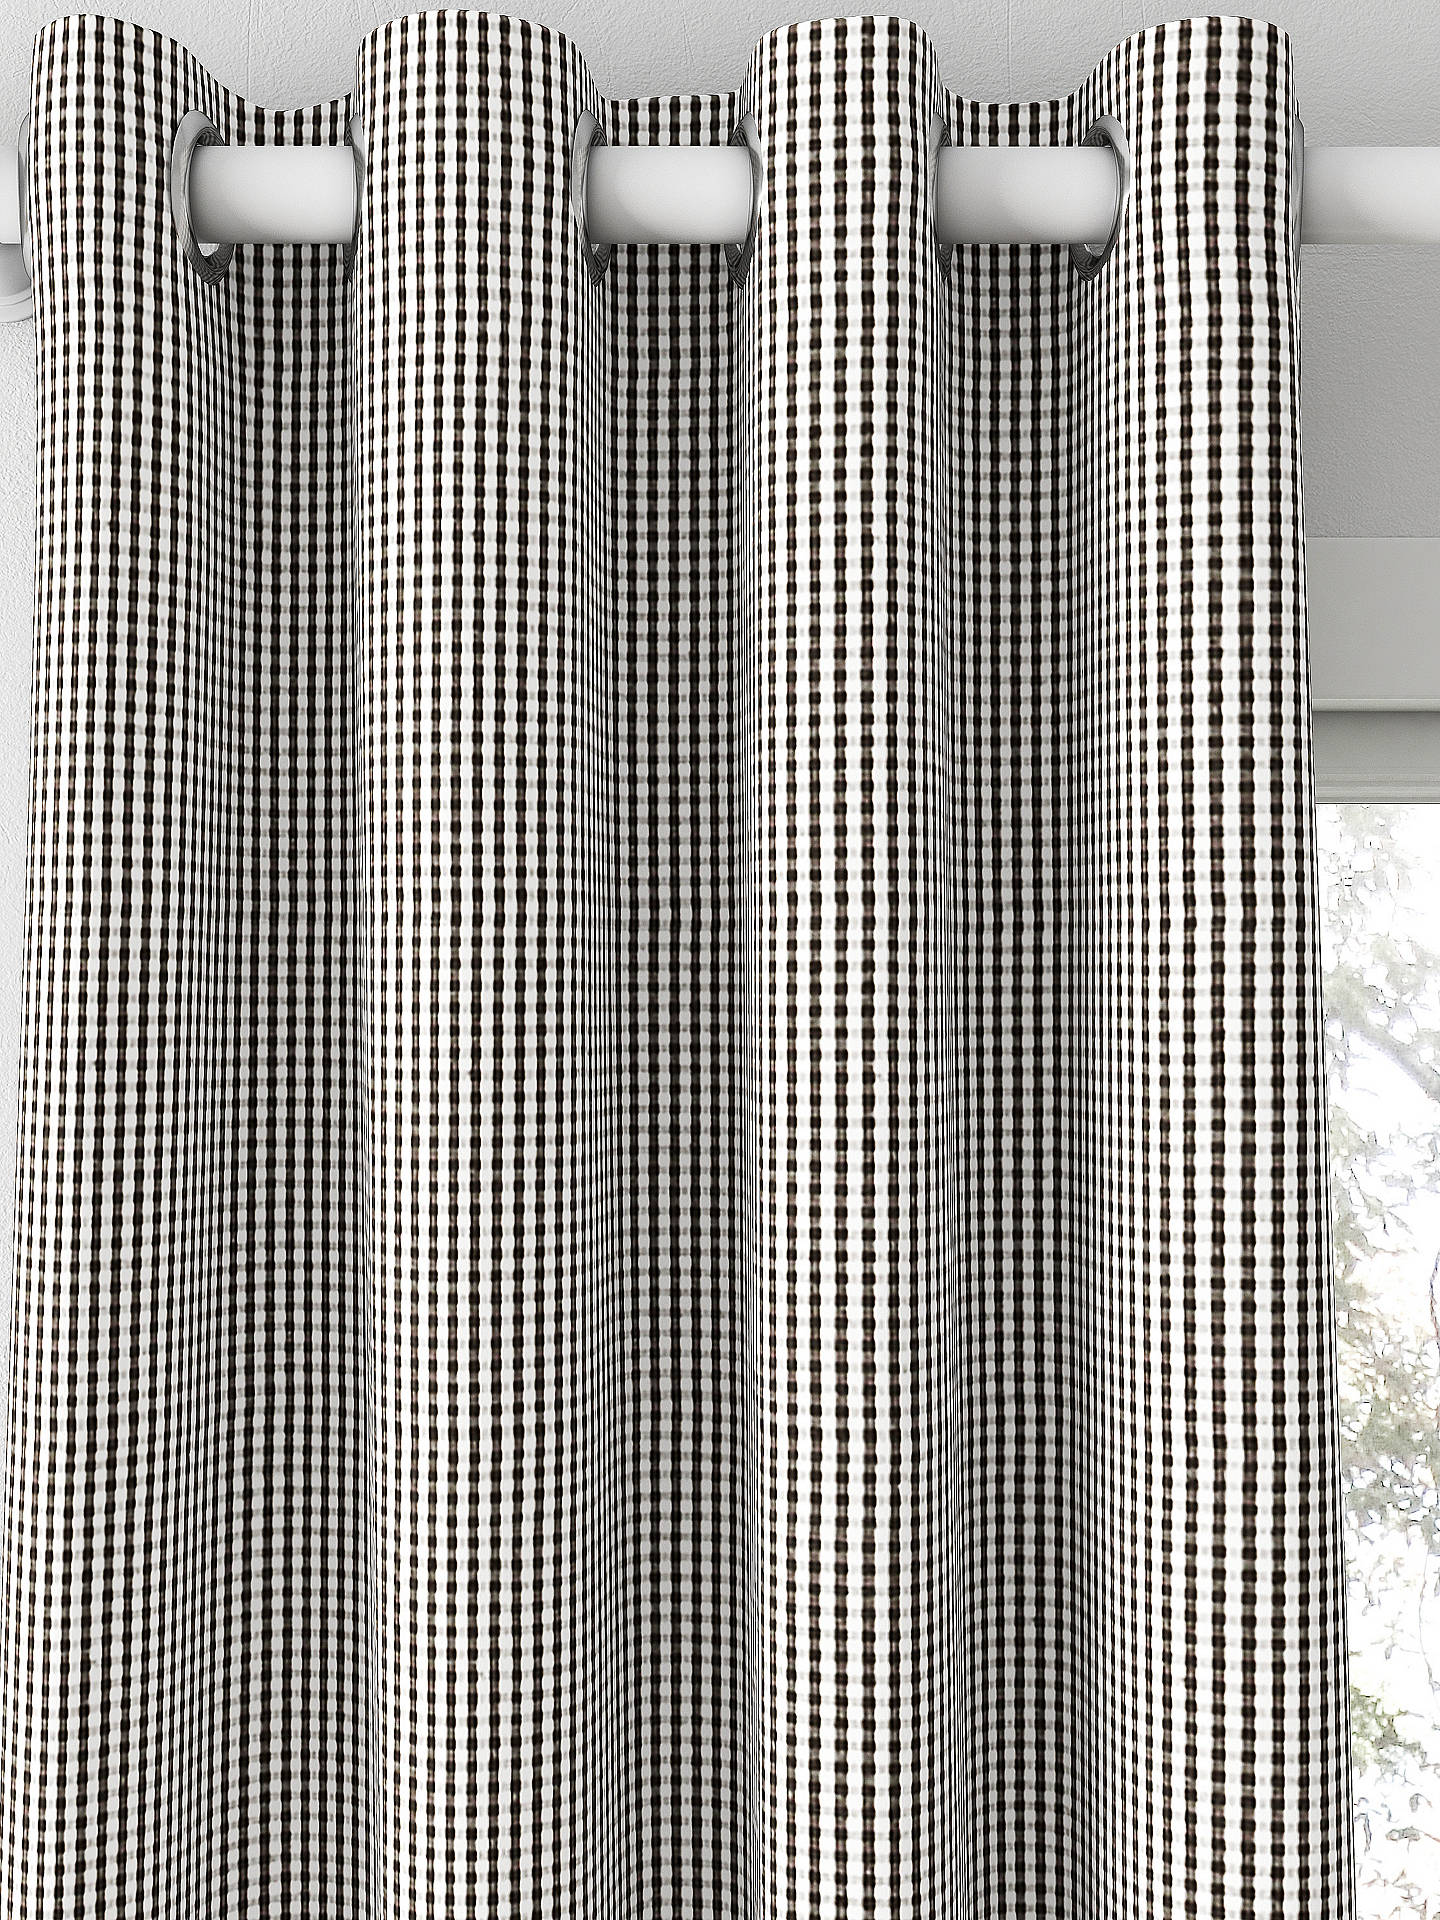 Clarke & Clarke Windsor Made to Measure Curtains, Charcoal